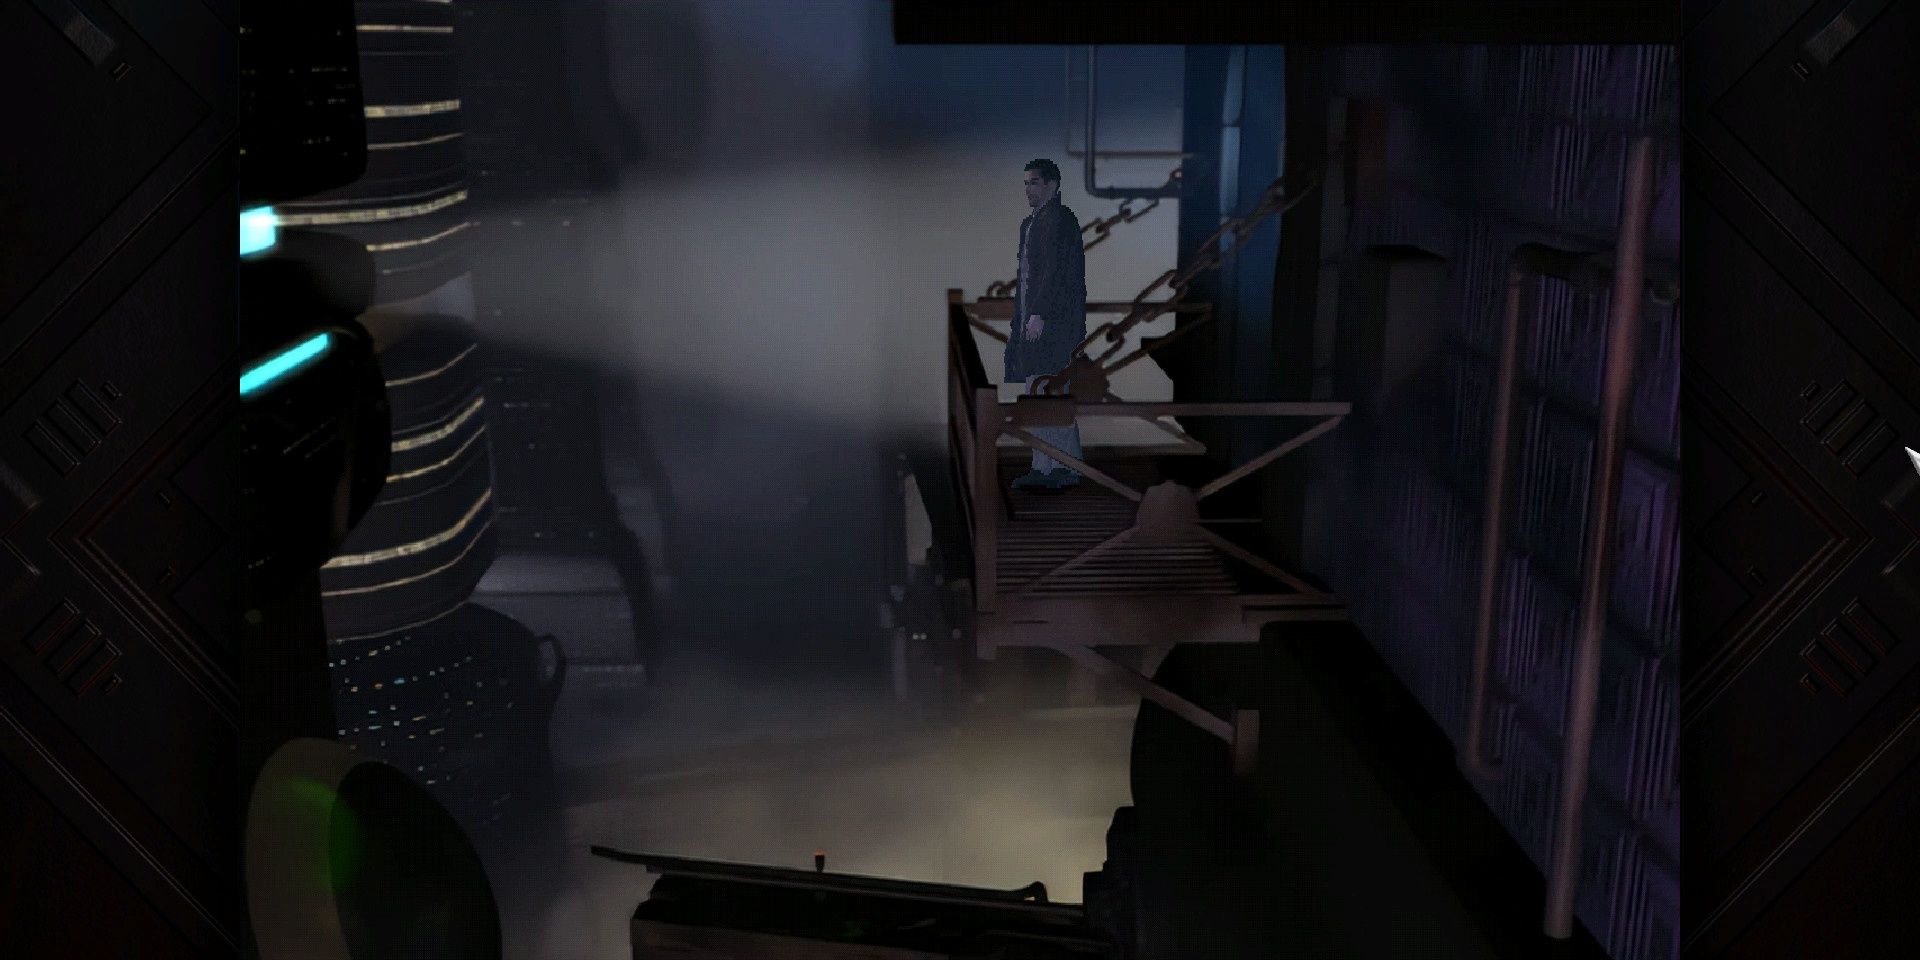 A screenshot showing Ray McCoy standing on a balcony in Blade Runner: Enhanced Edition